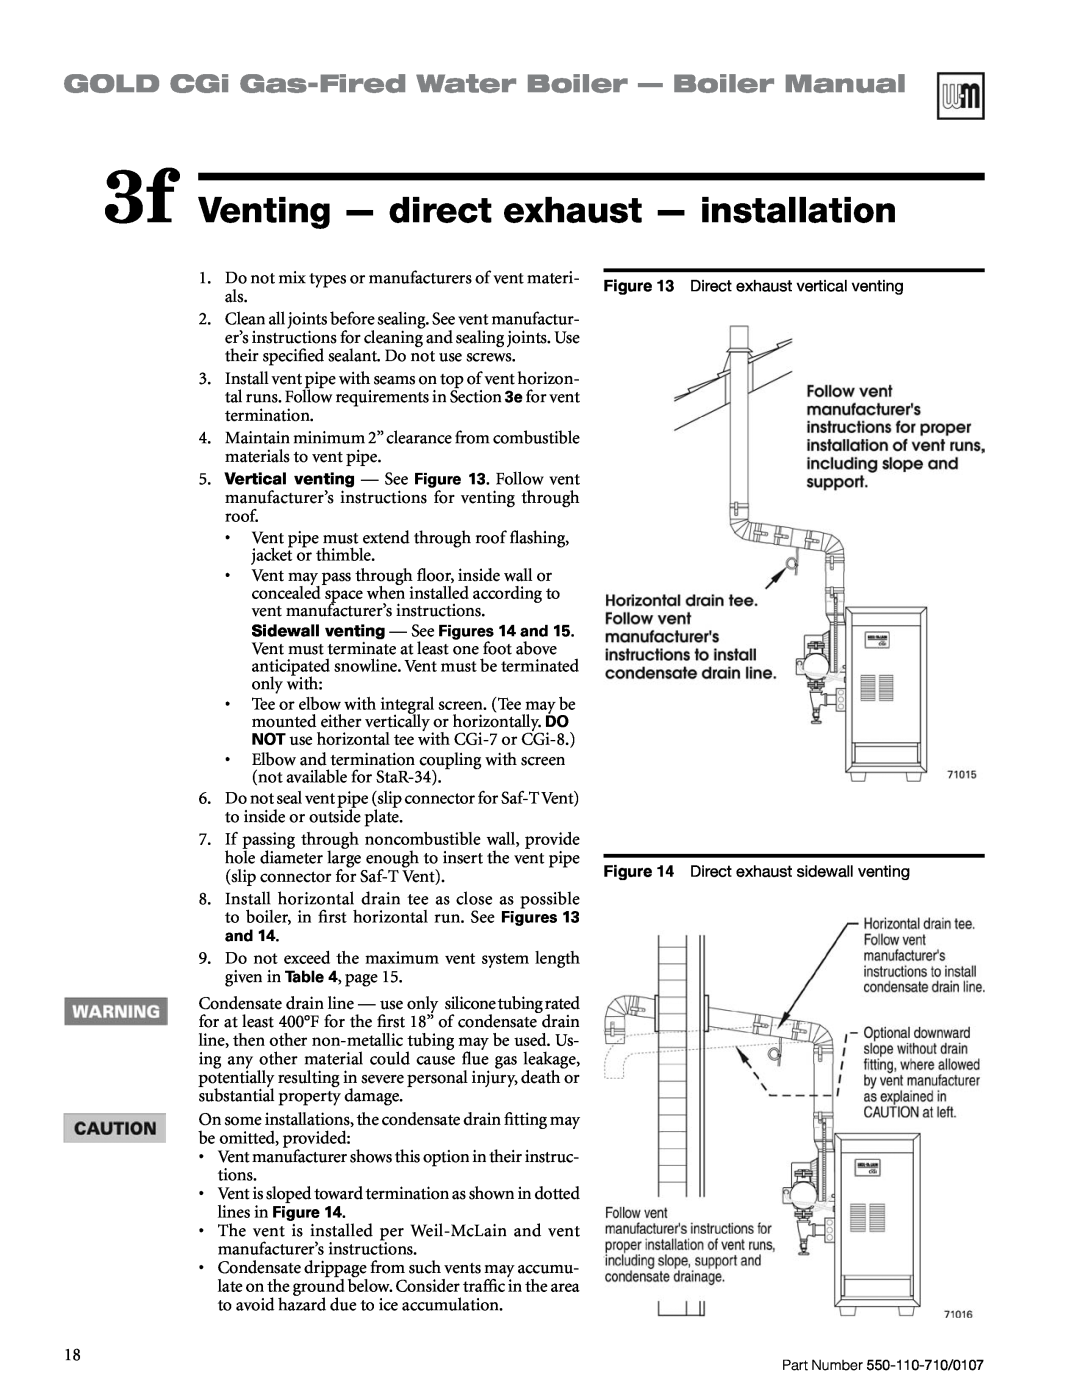 Weil-McLain Series 2 manual 3f Venting — direct exhaust — installation, GOLD CGi Gas-FiredWater Boiler - Boiler Manual 